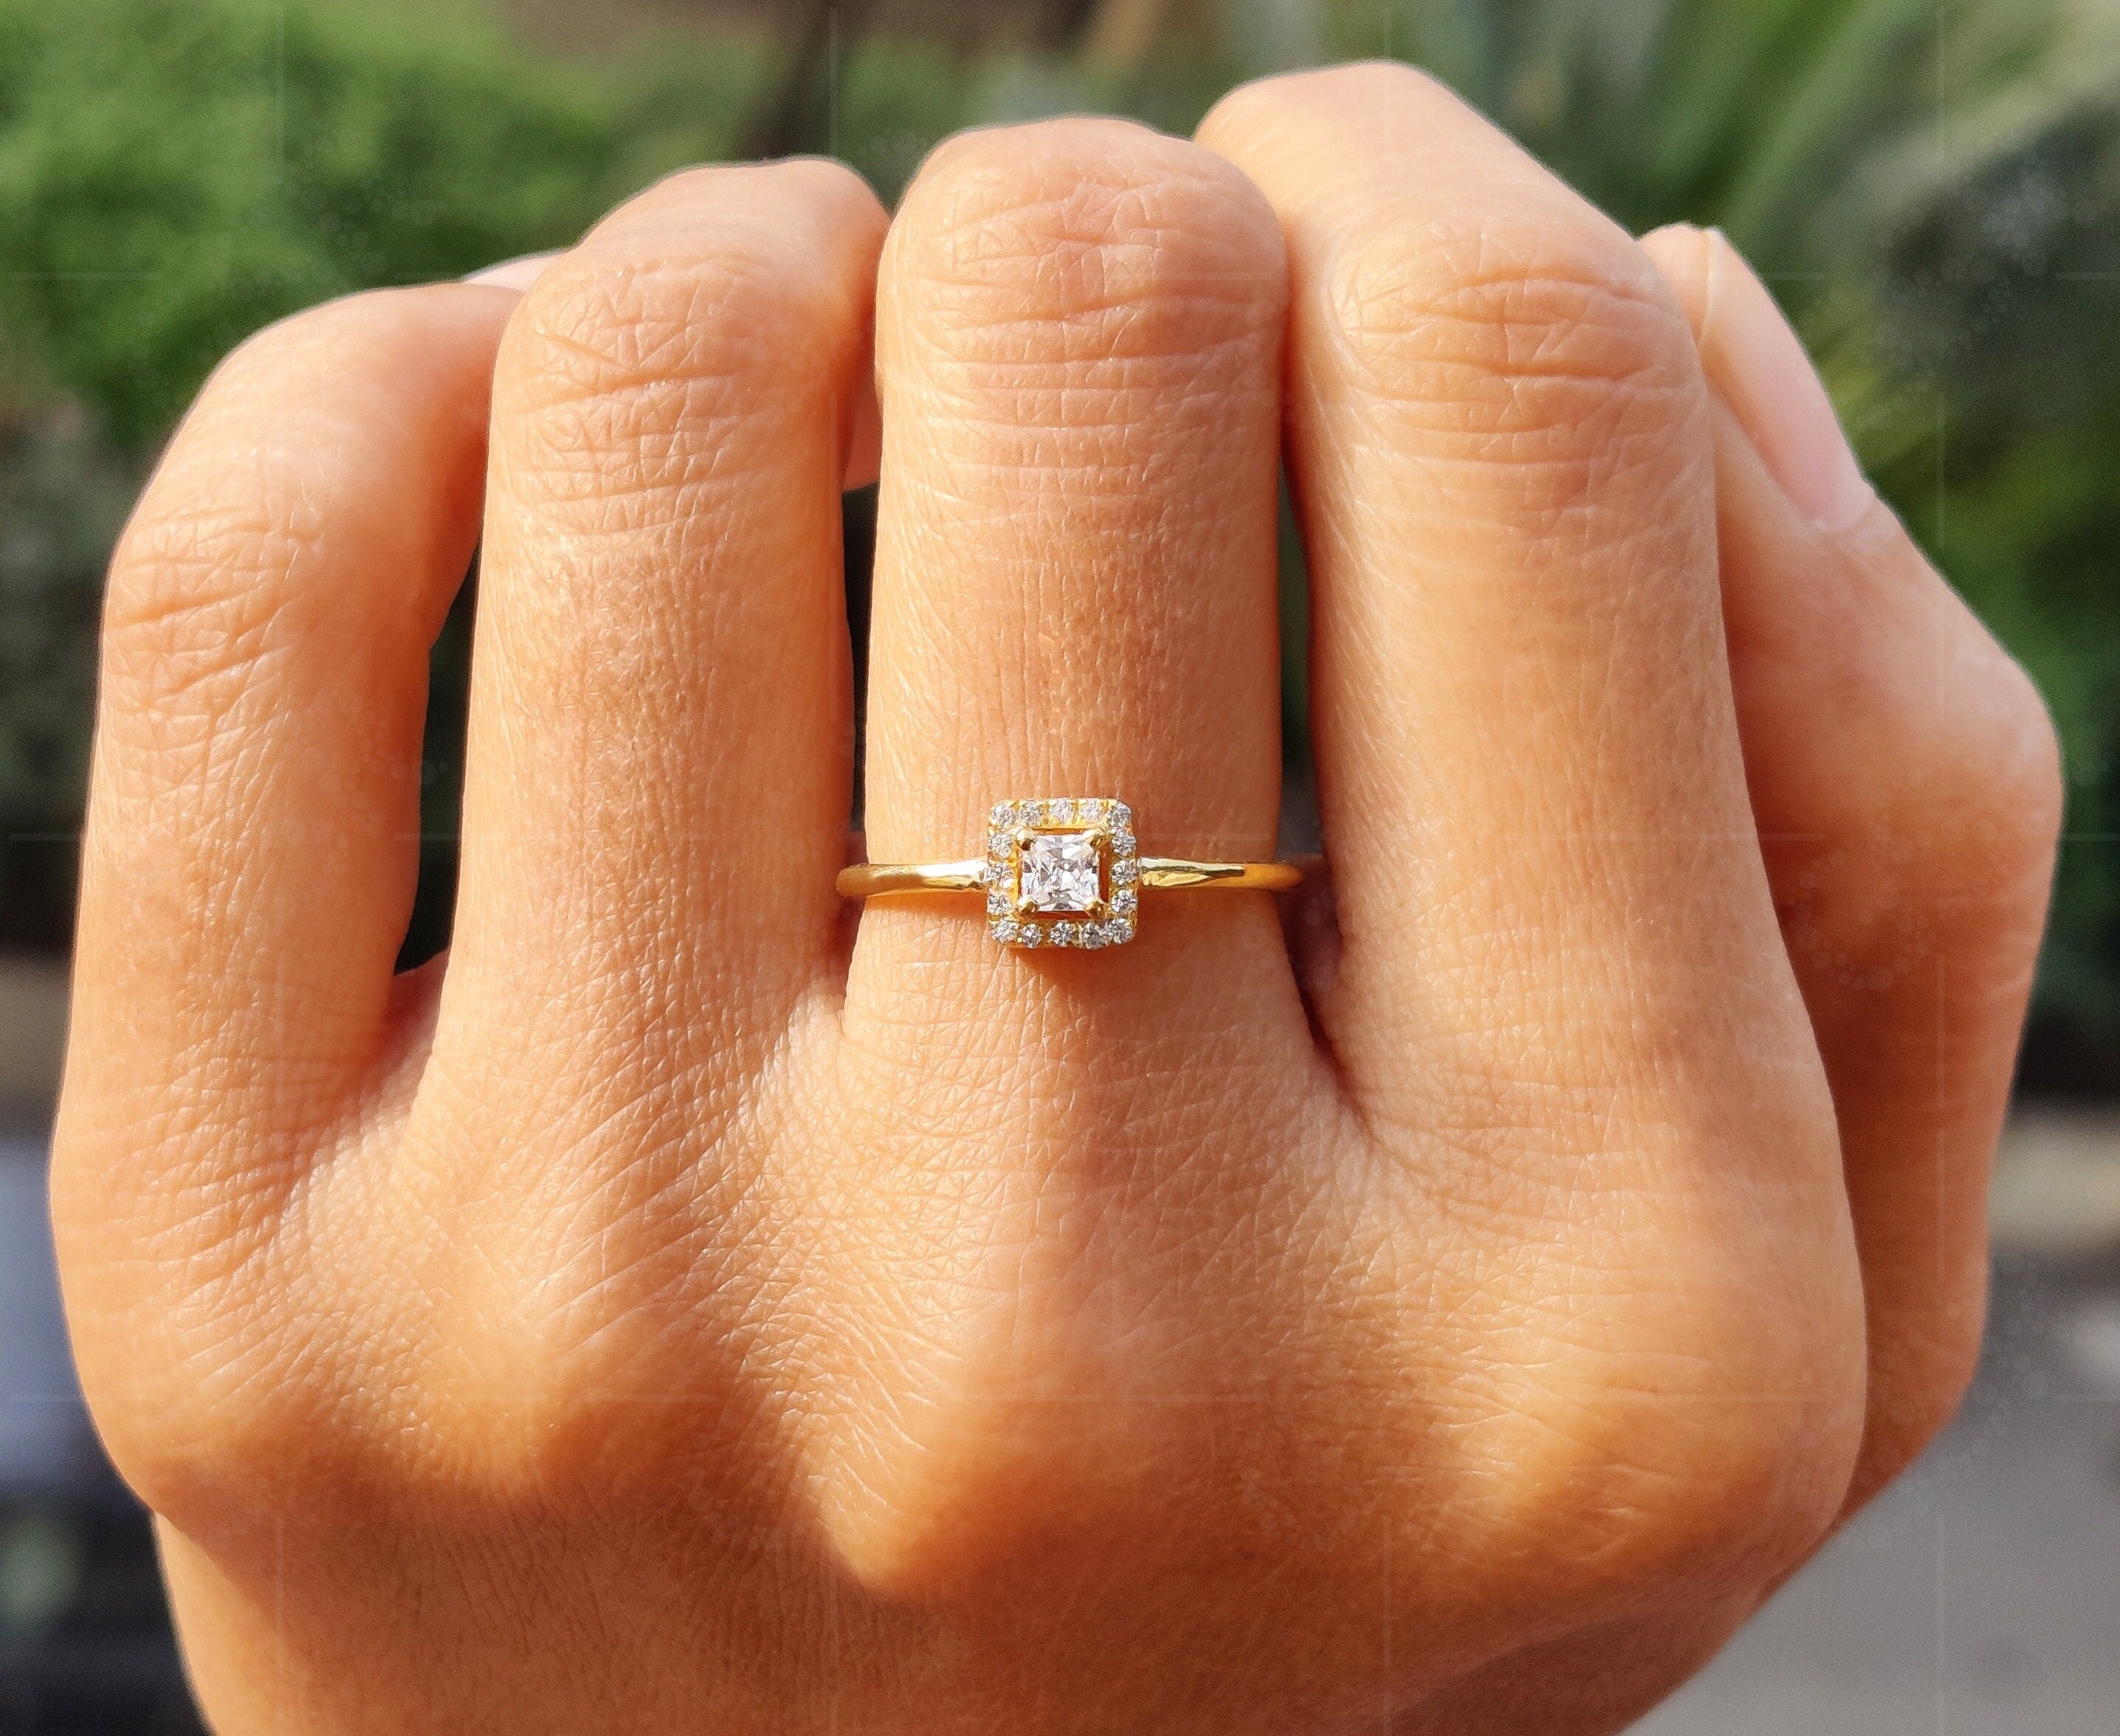 Regal Elegance: Princess Cut Moissanite Ring in Silver and Gold, a Stunning Halo Engagement Ring and Stacking Delight